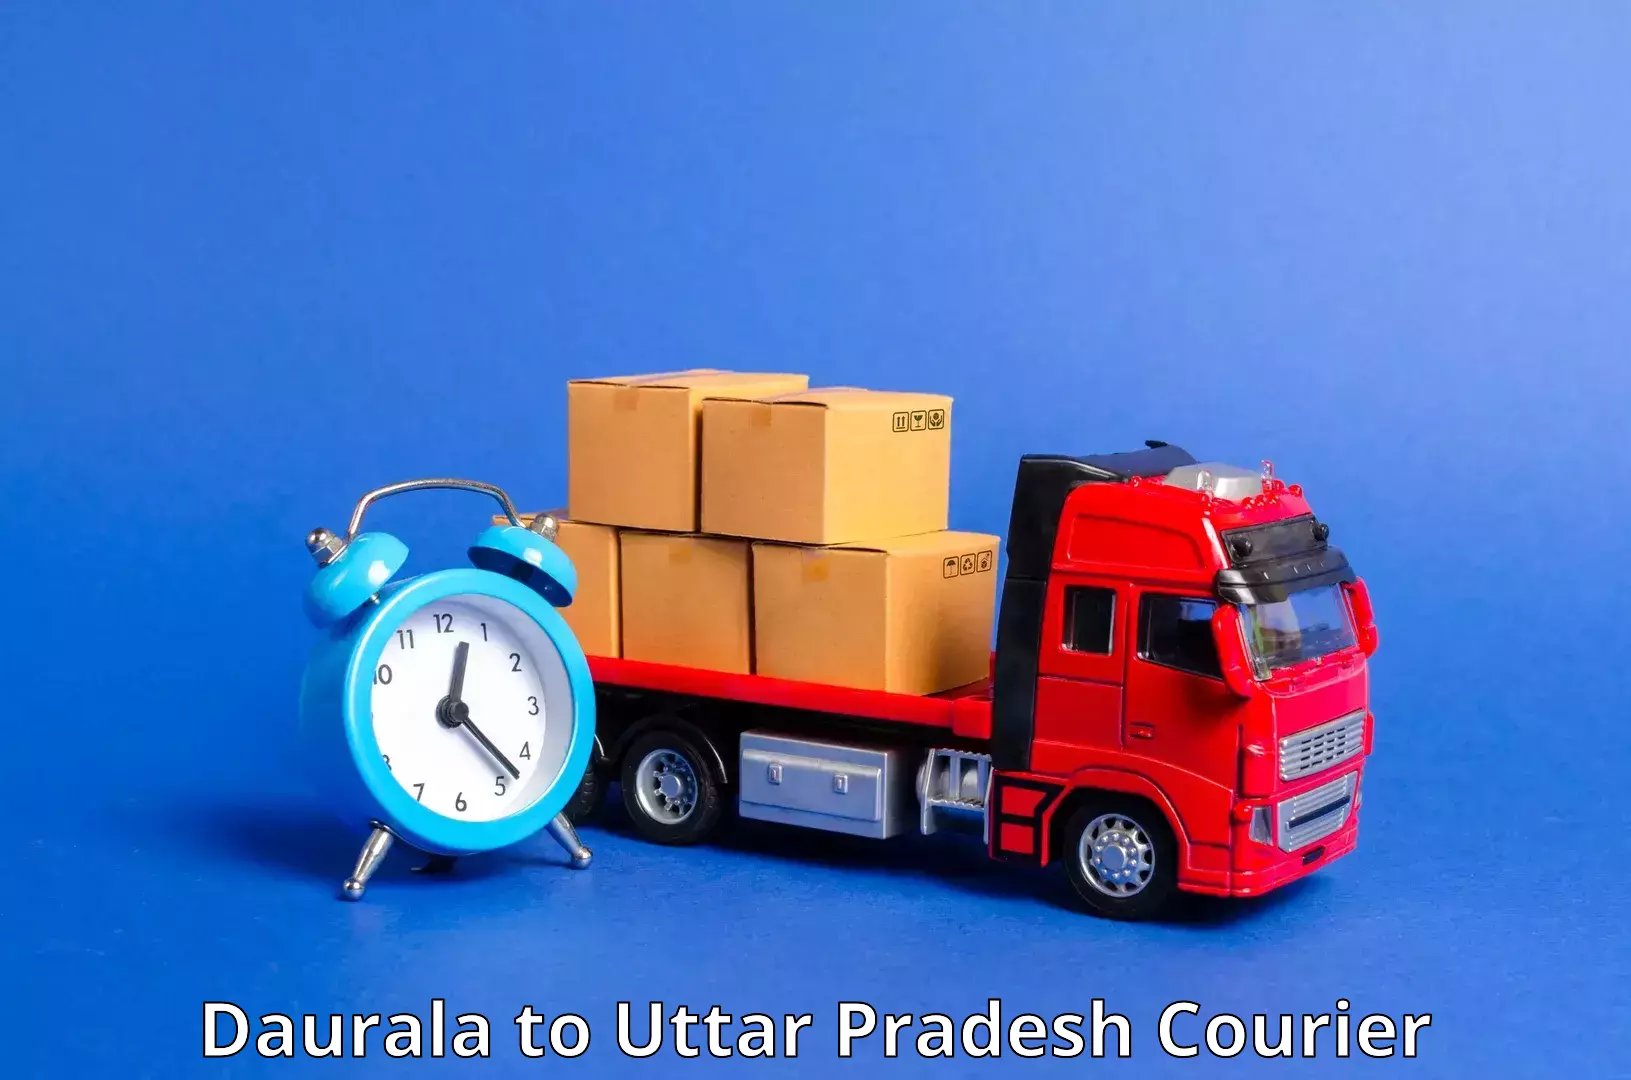 Express delivery network Daurala to Kauriram